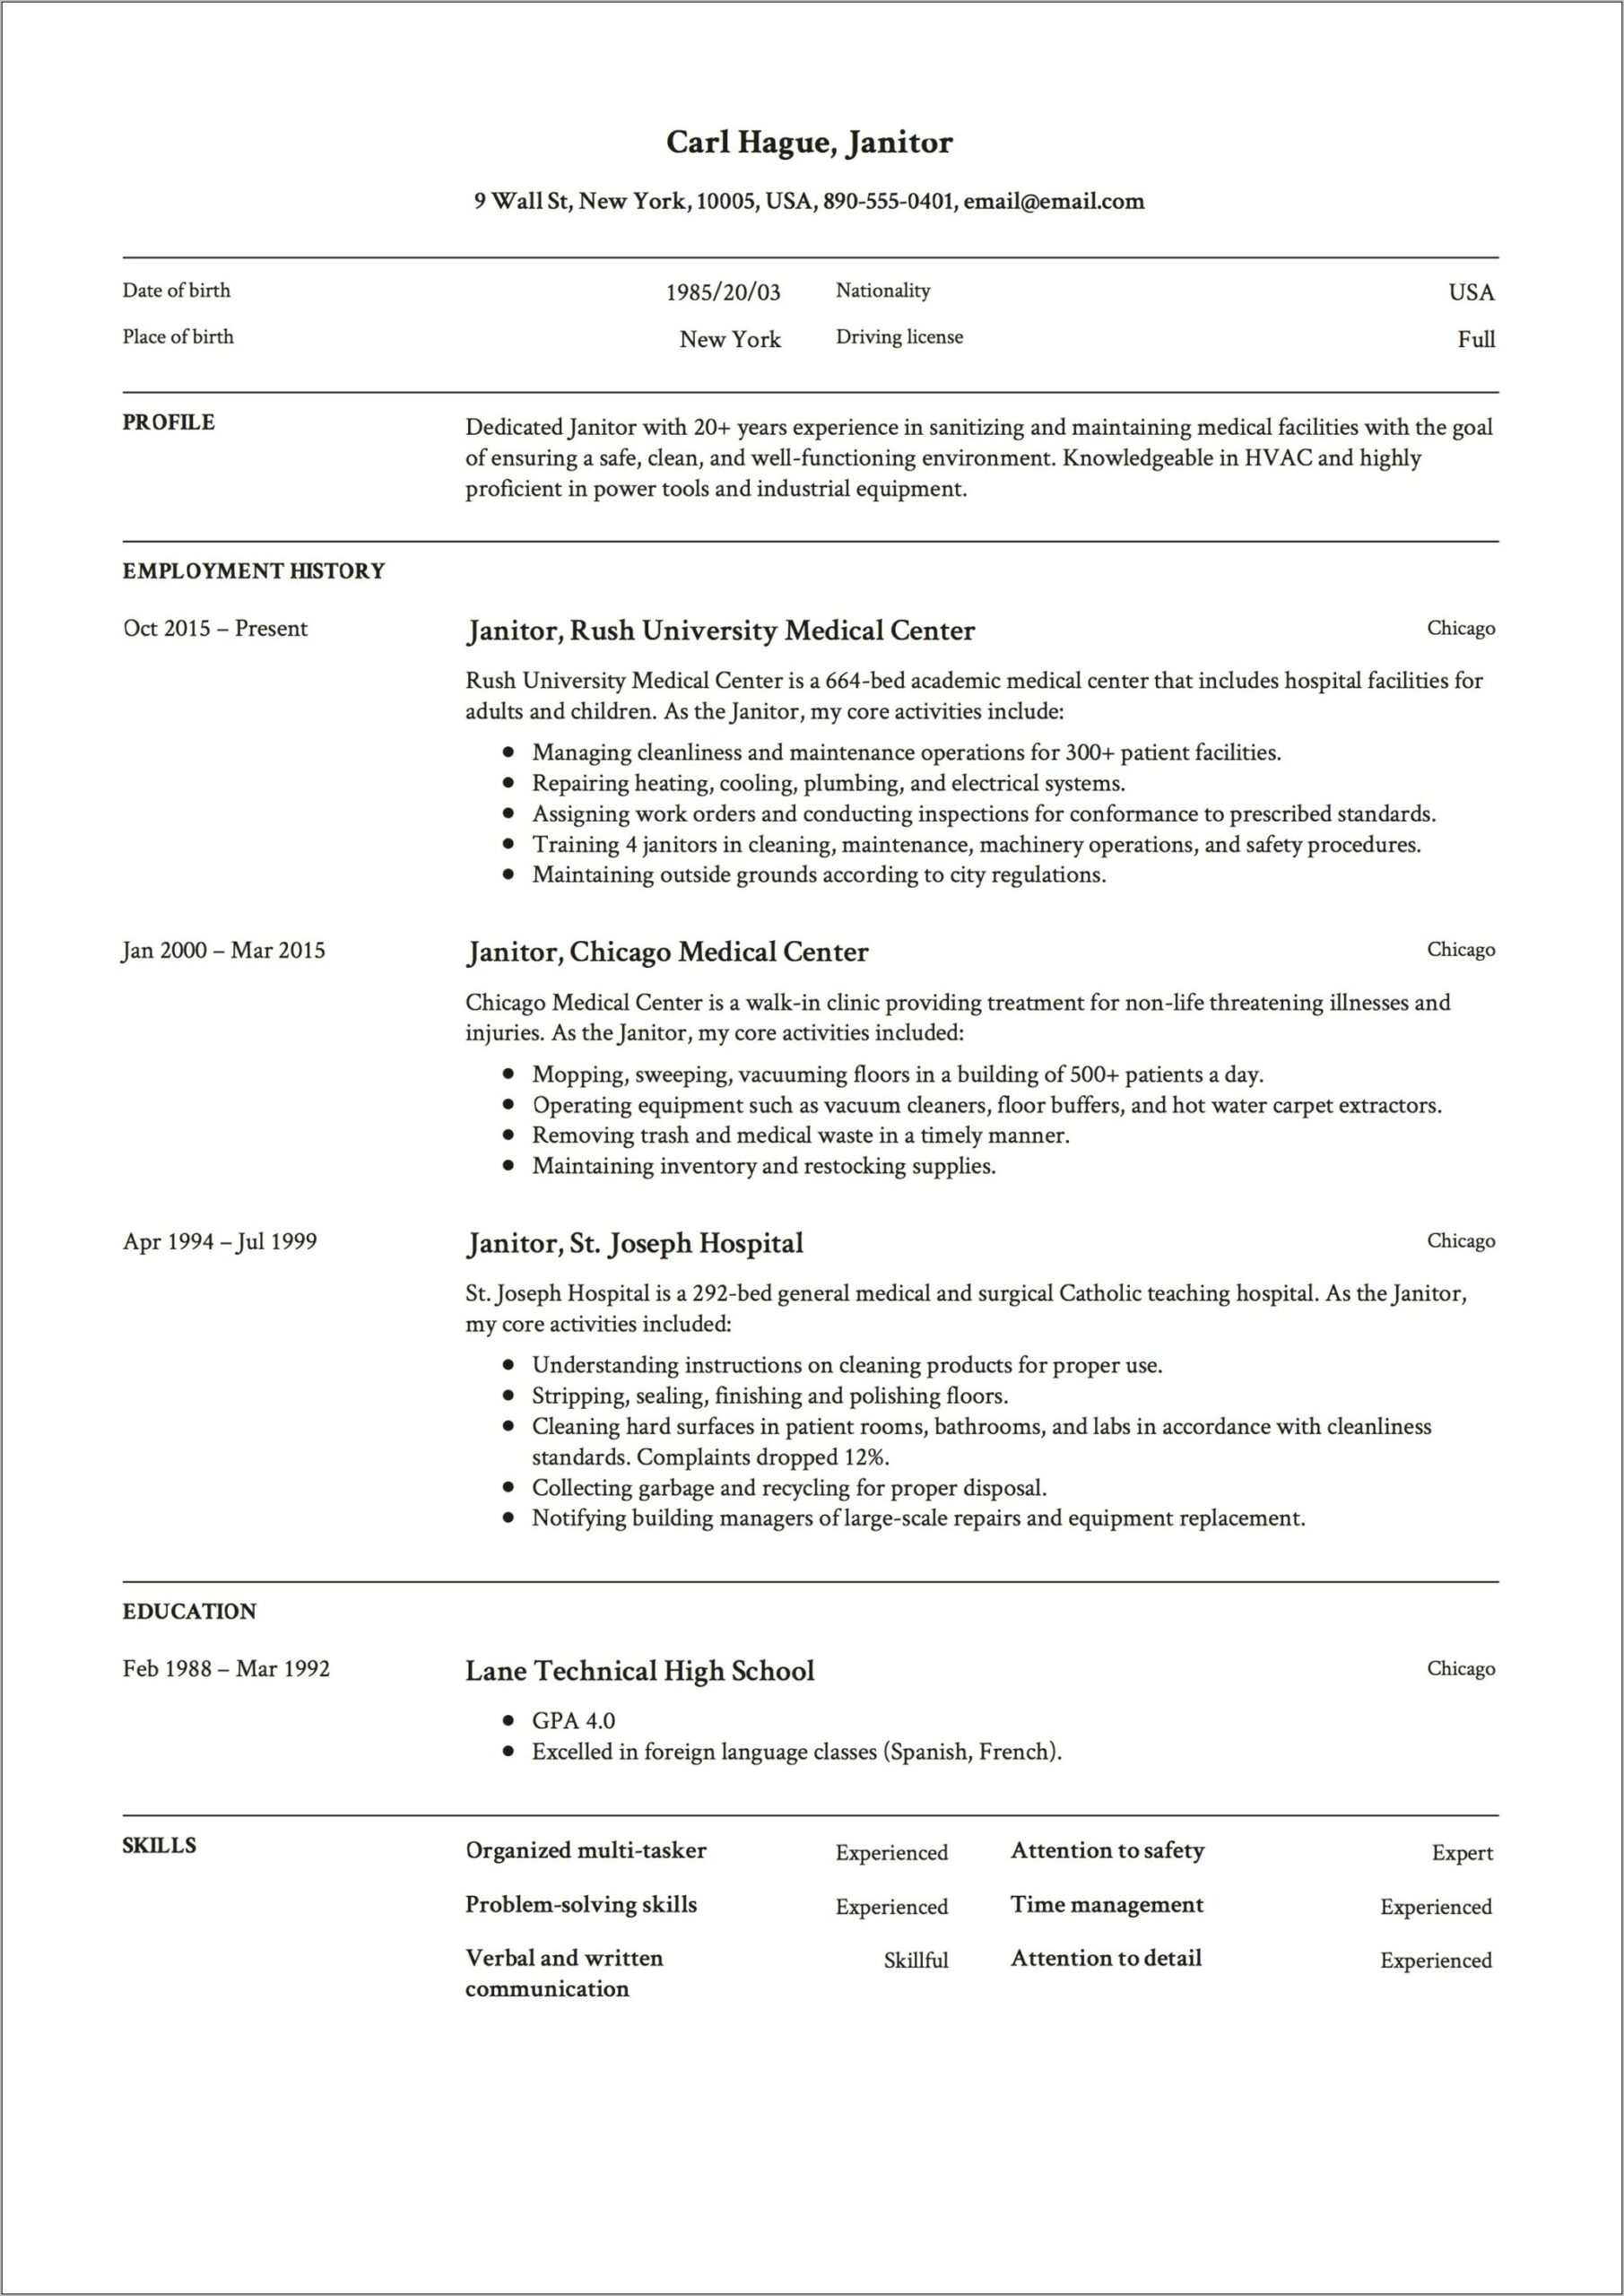 Resume Examples For Janitorial Supervisor